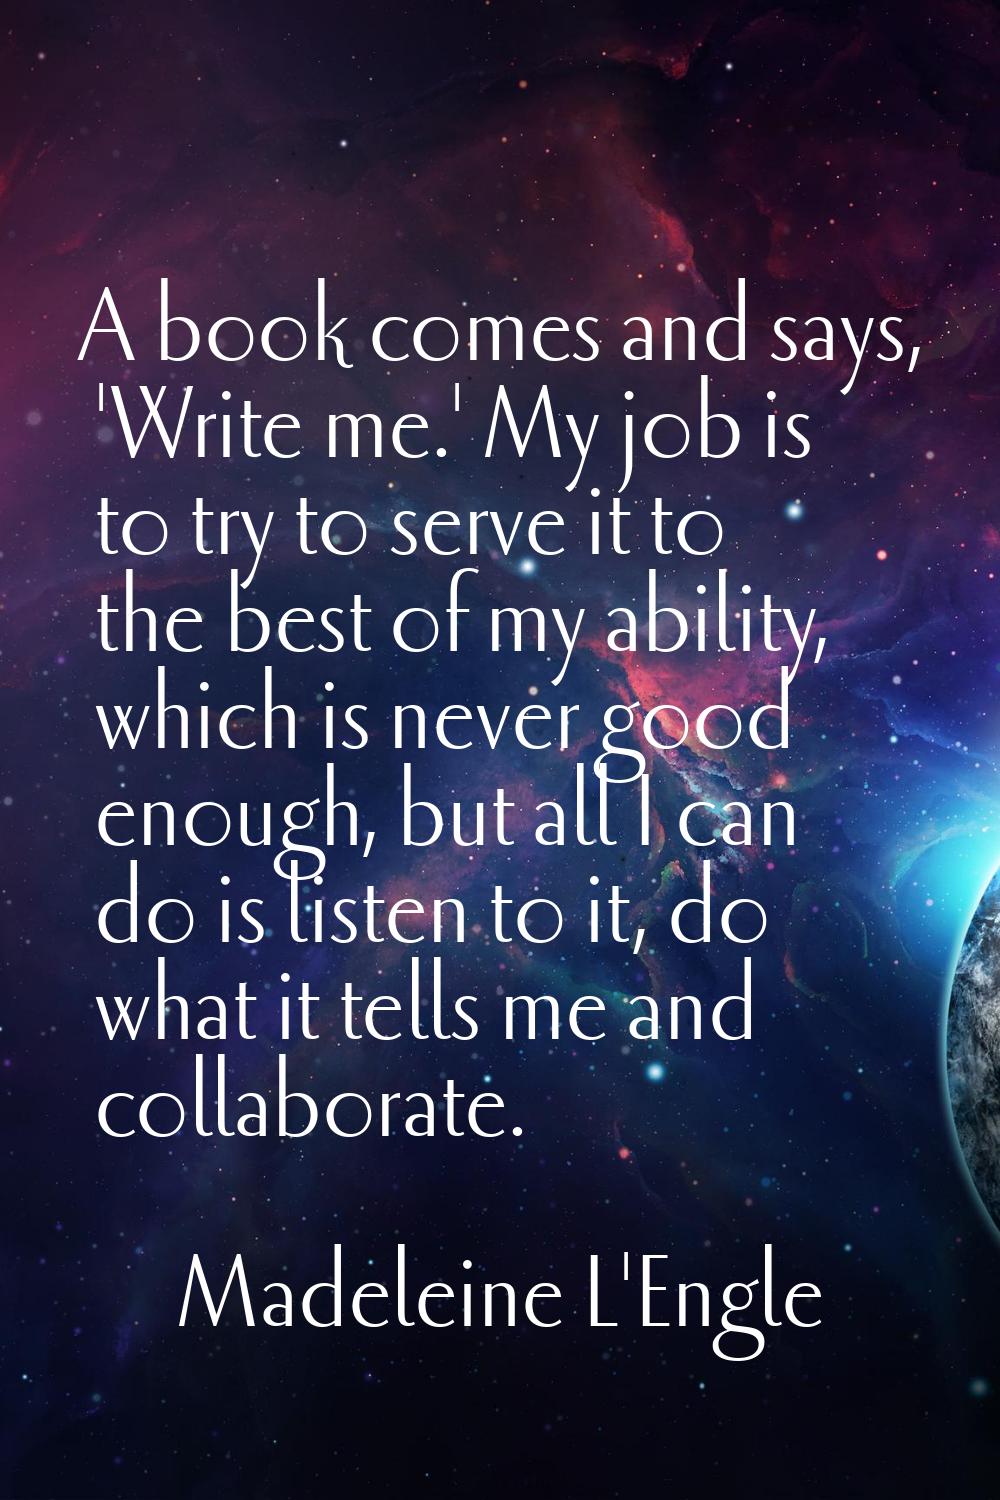 A book comes and says, 'Write me.' My job is to try to serve it to the best of my ability, which is